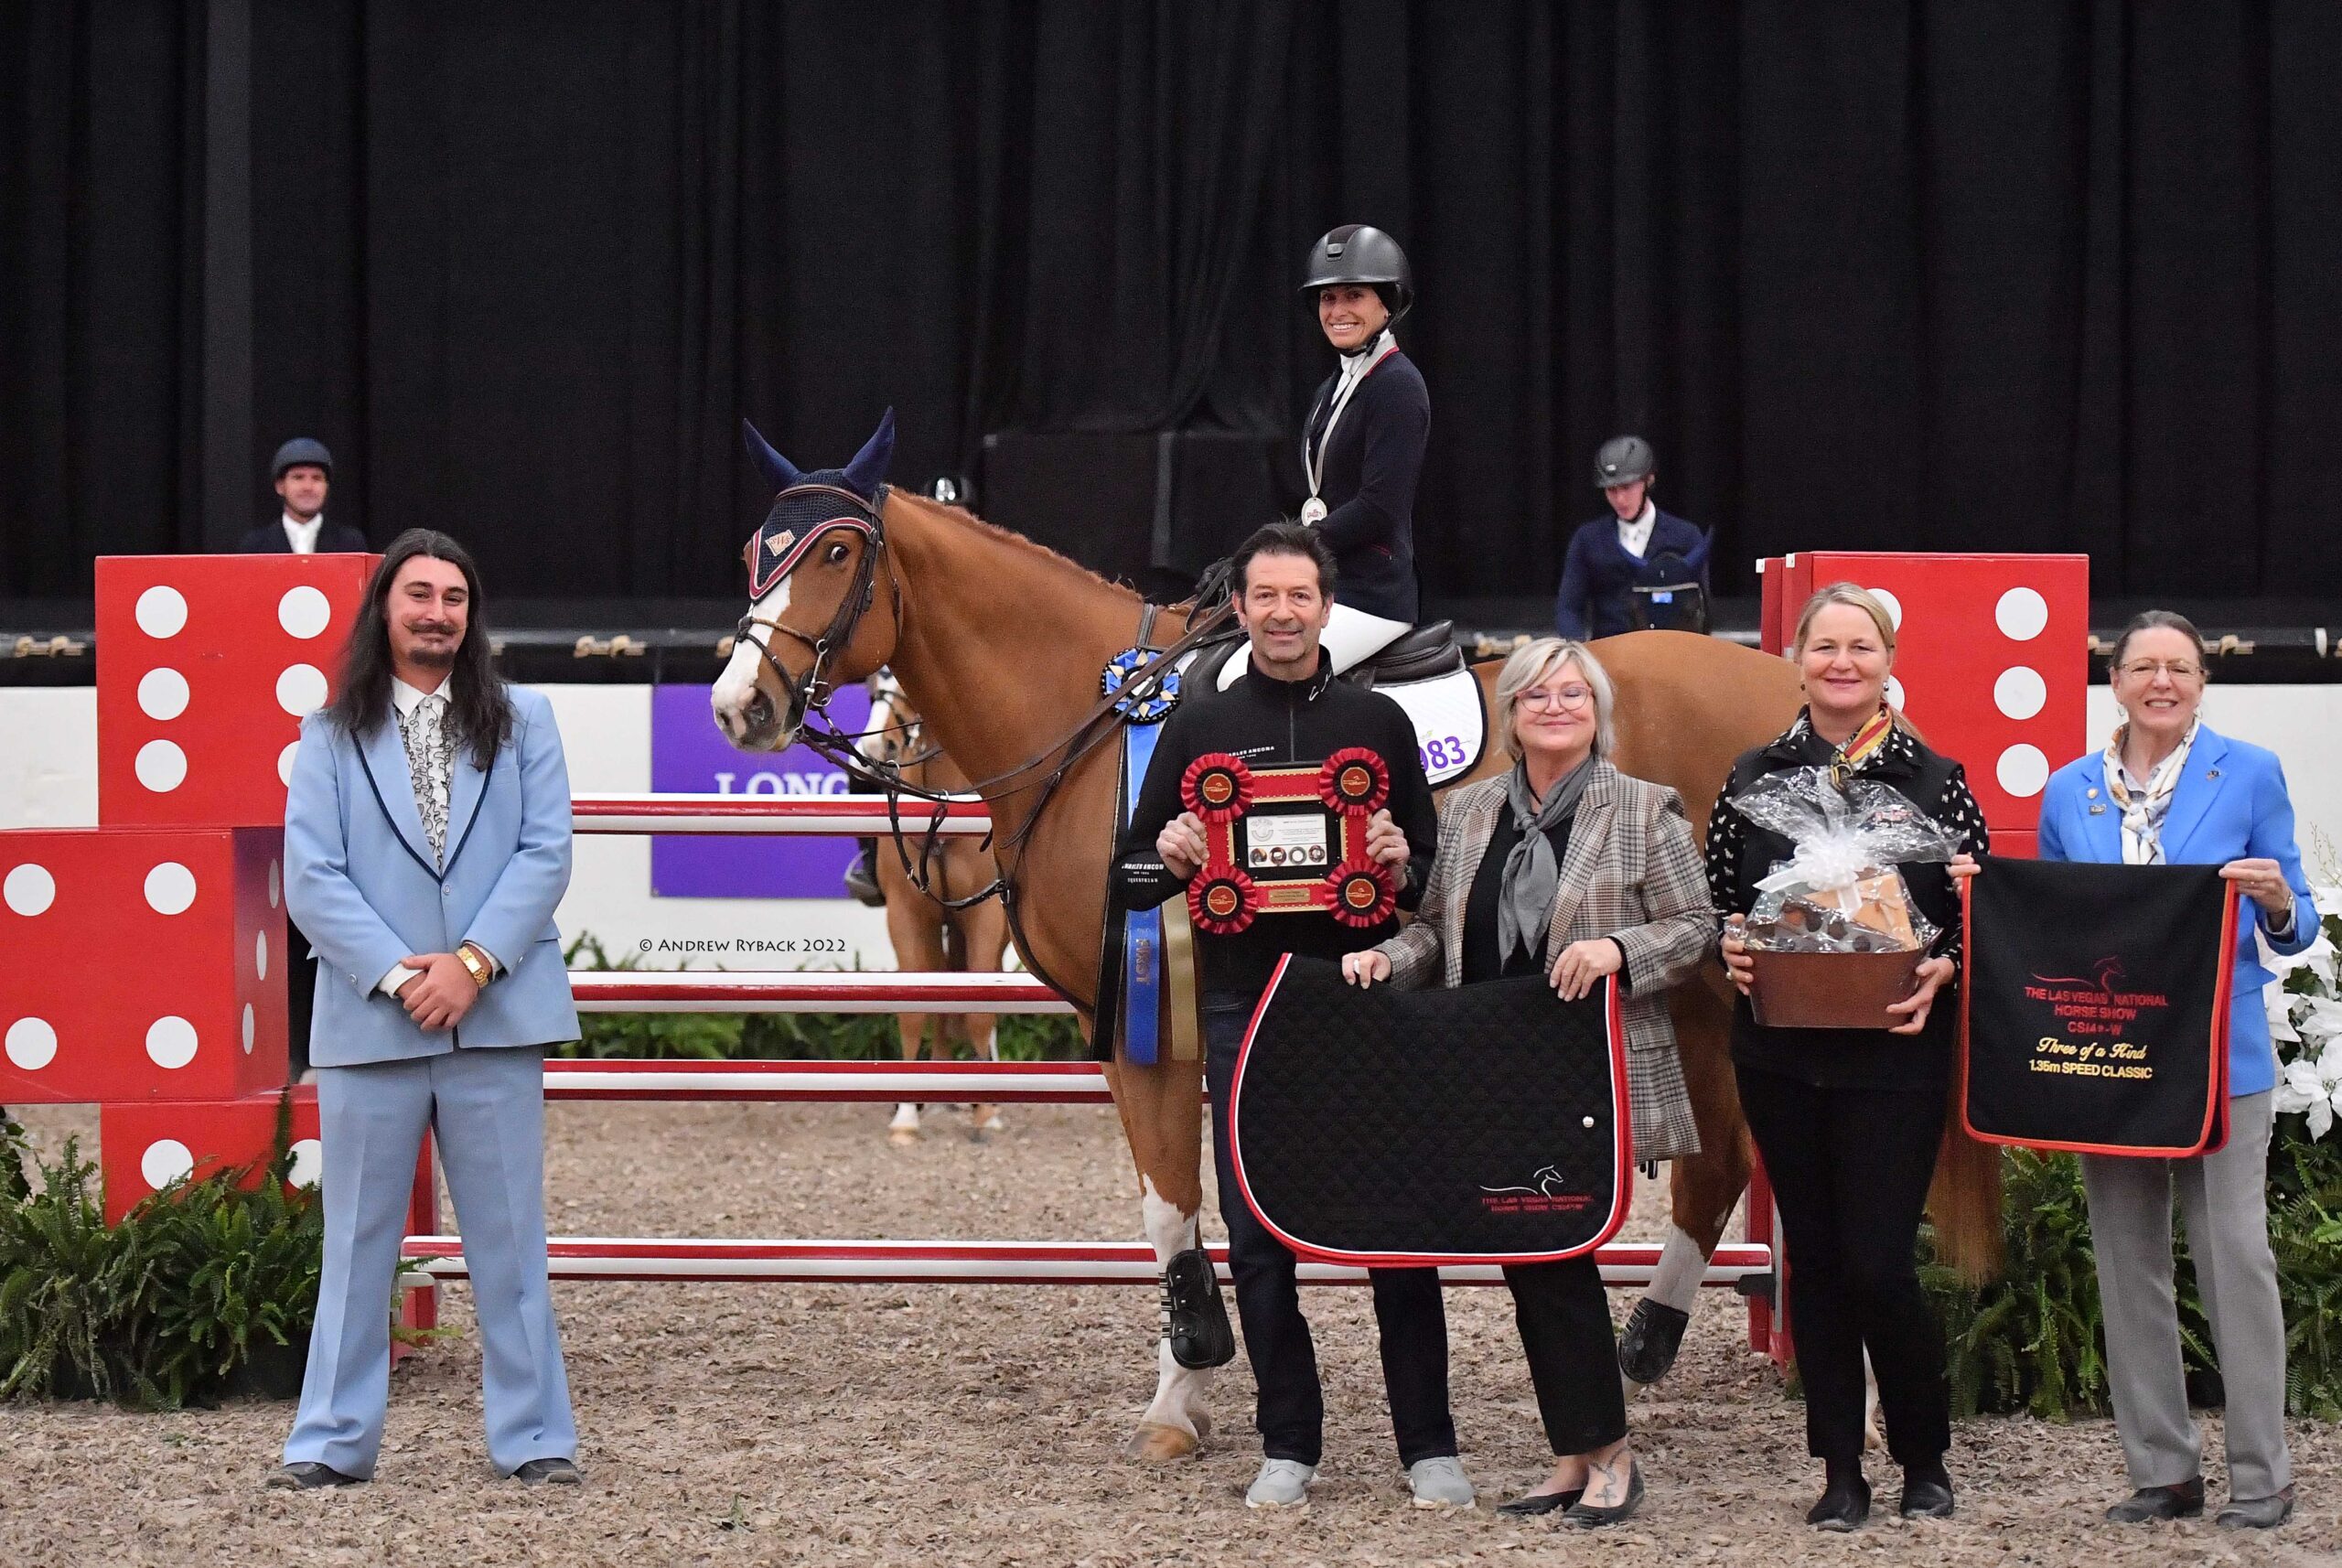 Alissa Brandt was presented as the winner of the WCE Junior/Amateur Medal Finals, presented by the CPHA Foundation.